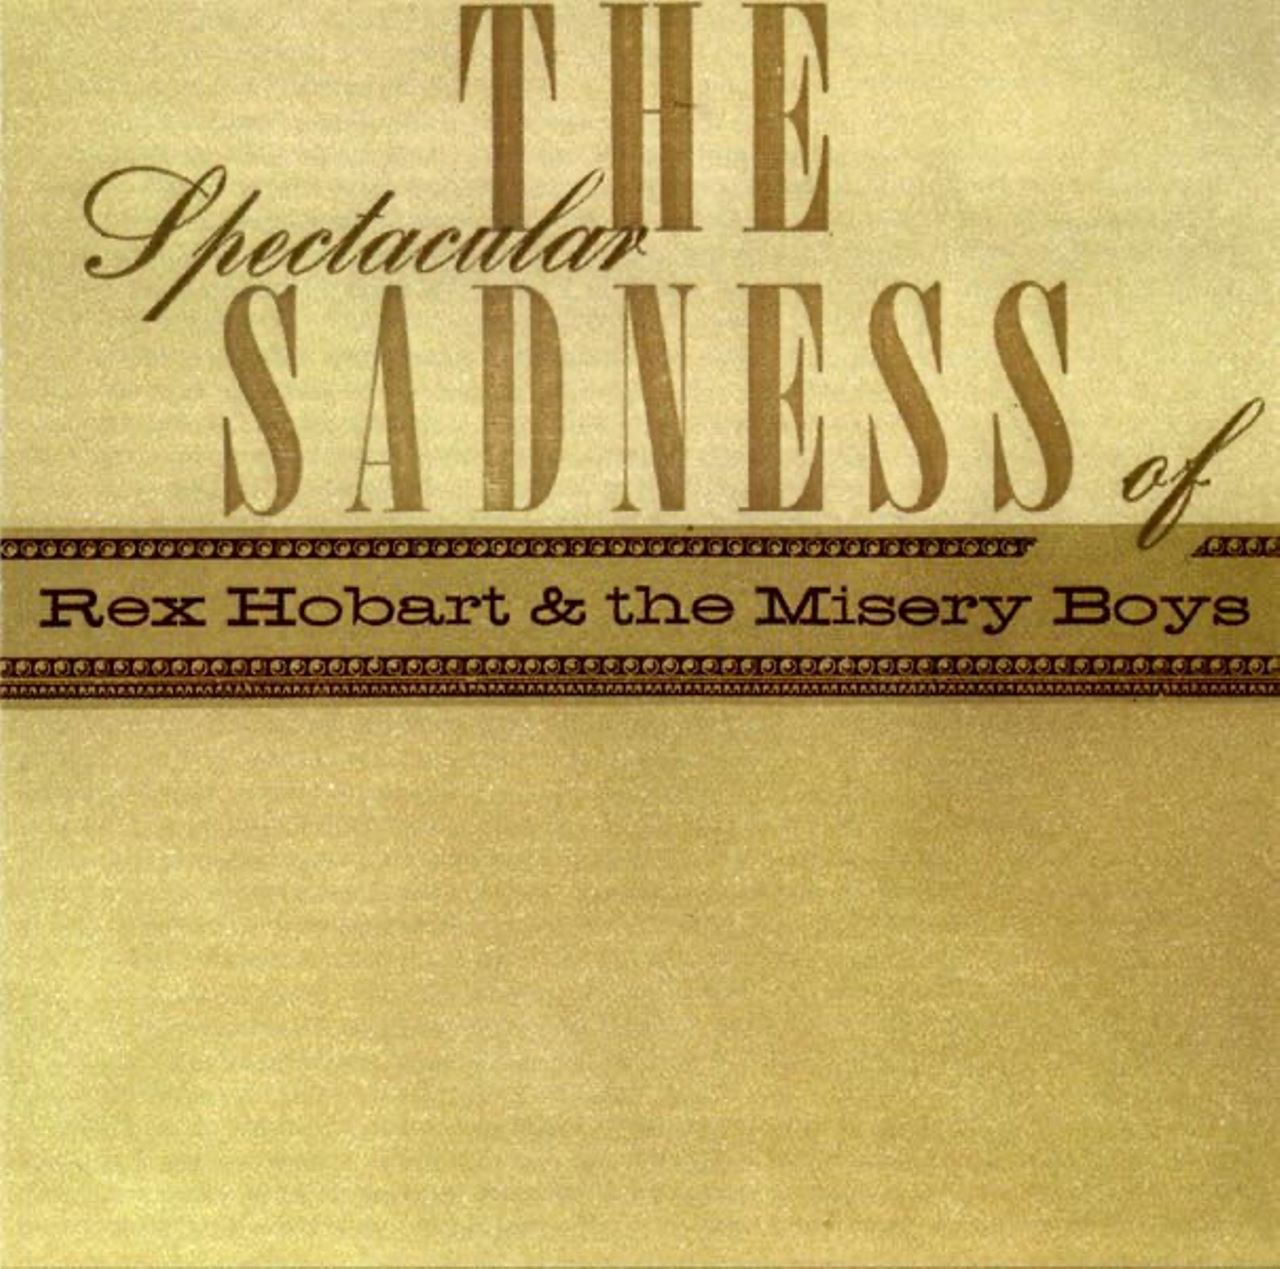 Rex Hobart & The Misery Boys - The Spectacular Sadness Of cover album